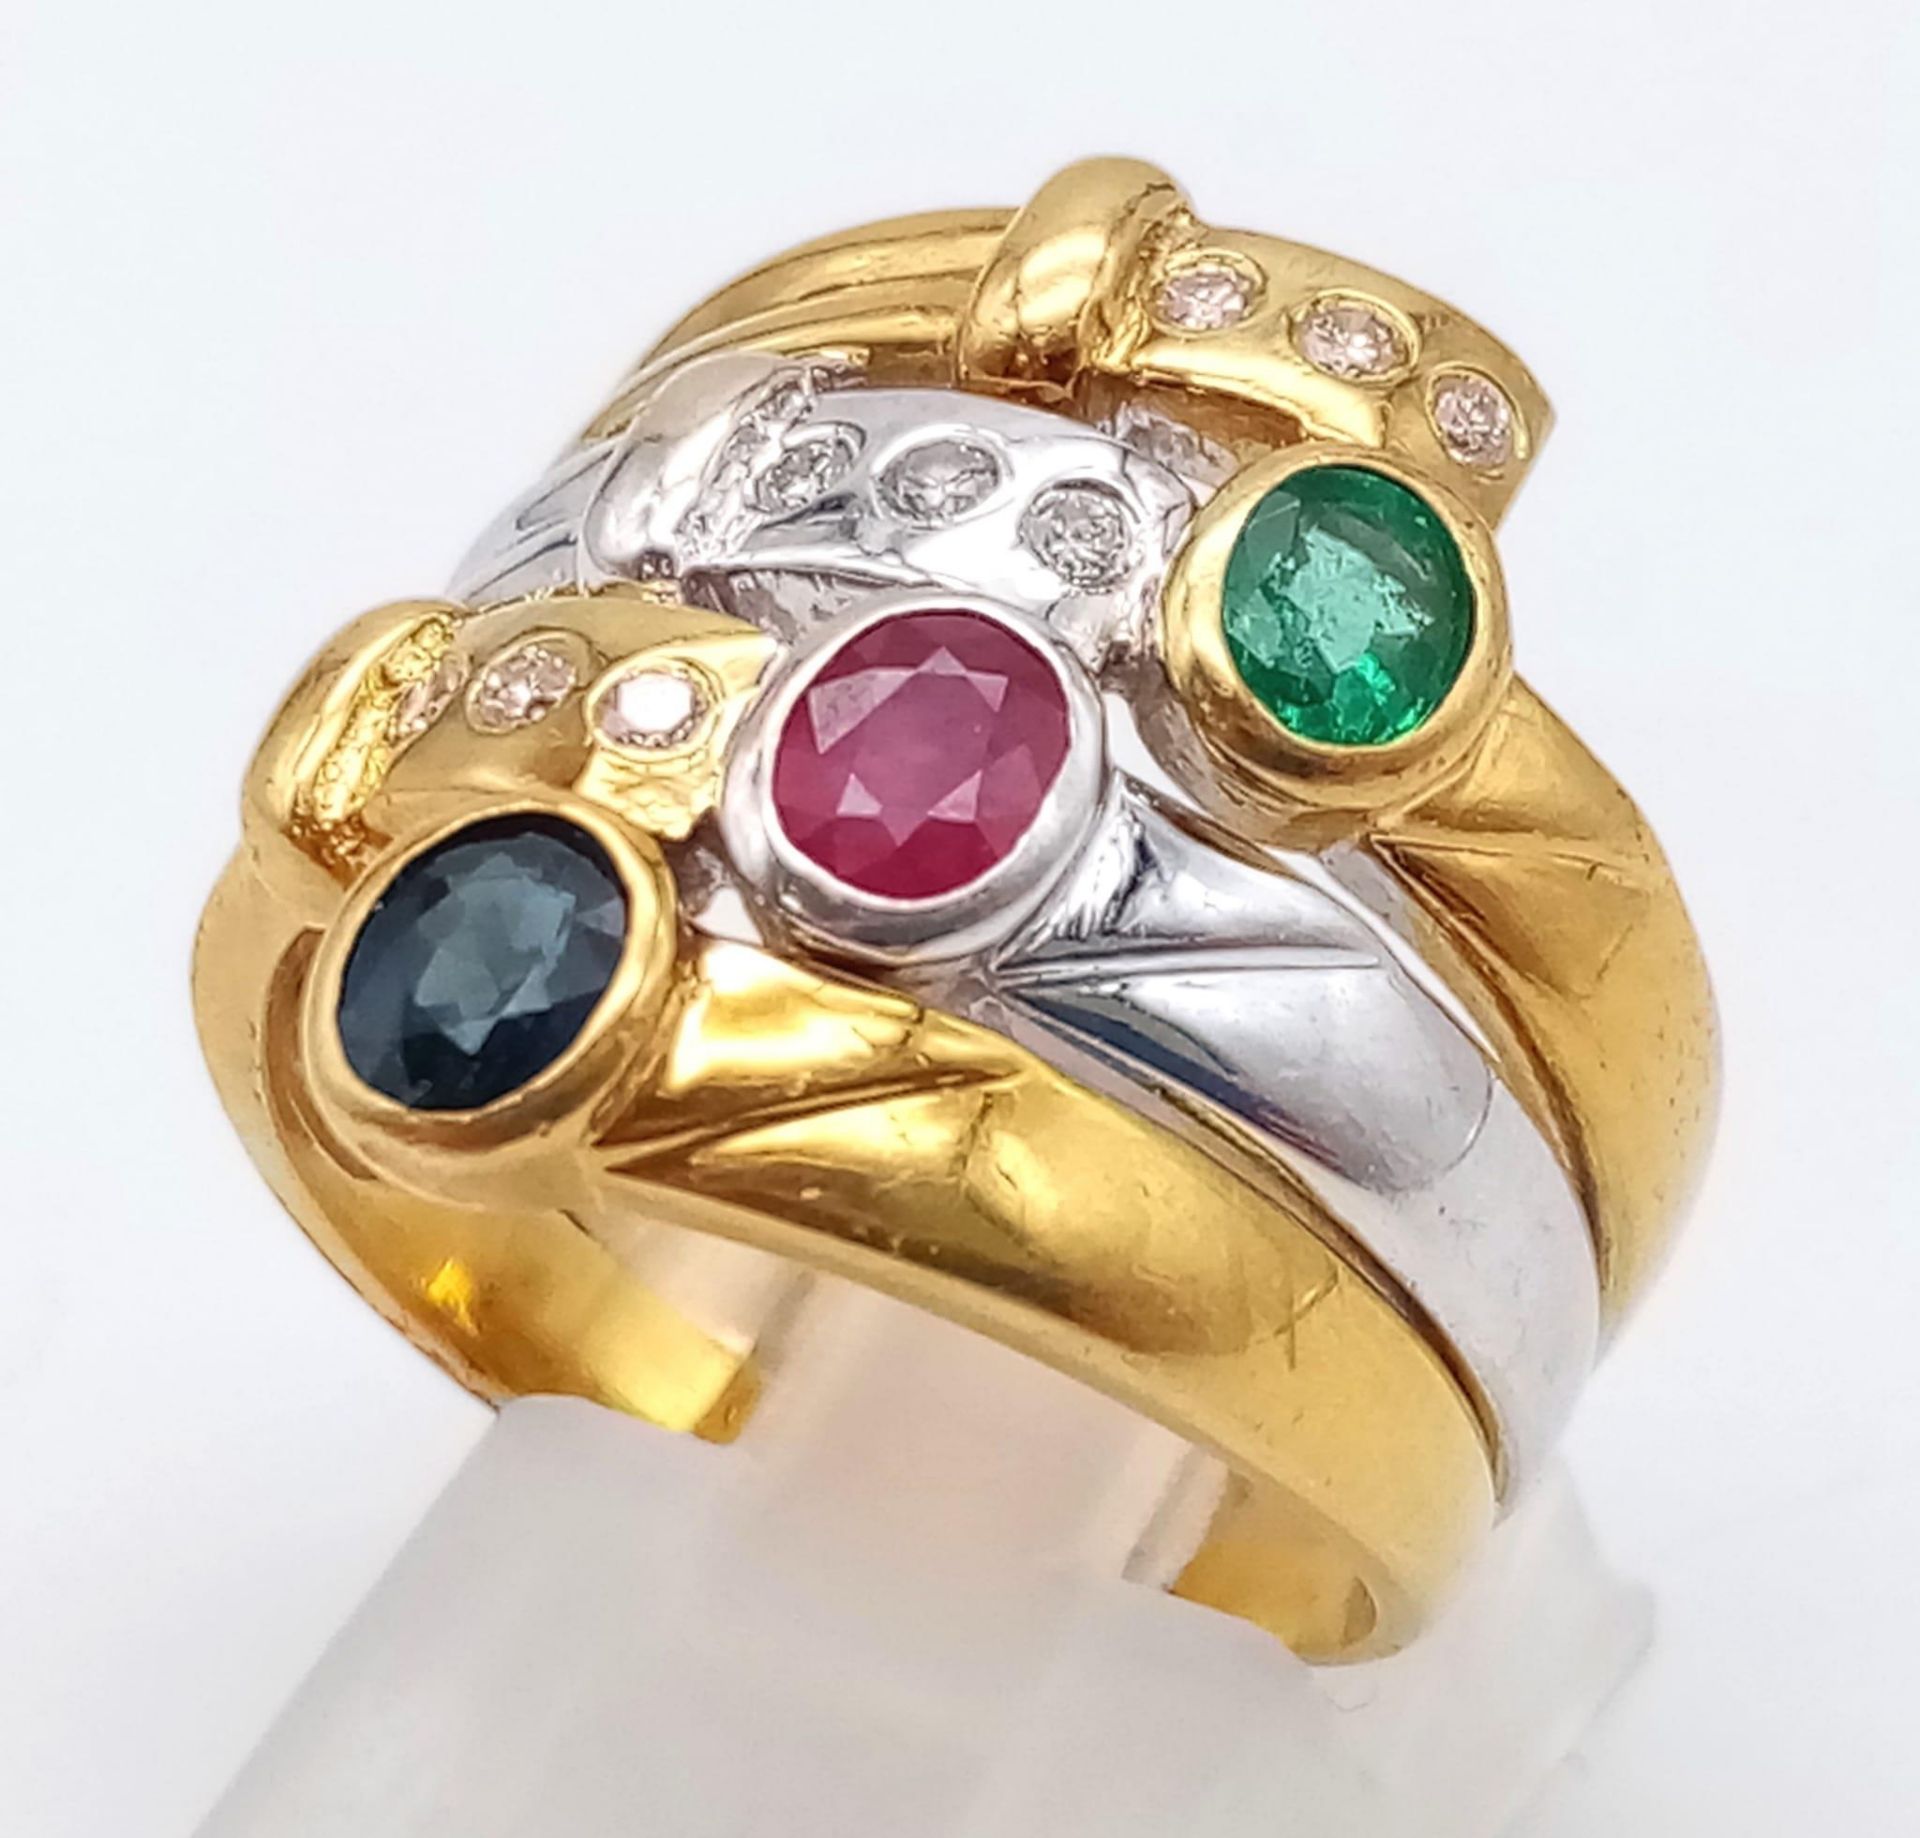 An Incredible 18K Yellow and White Gold Multi-Gemstone Ladies Dress Ring. Two full inner bands - one